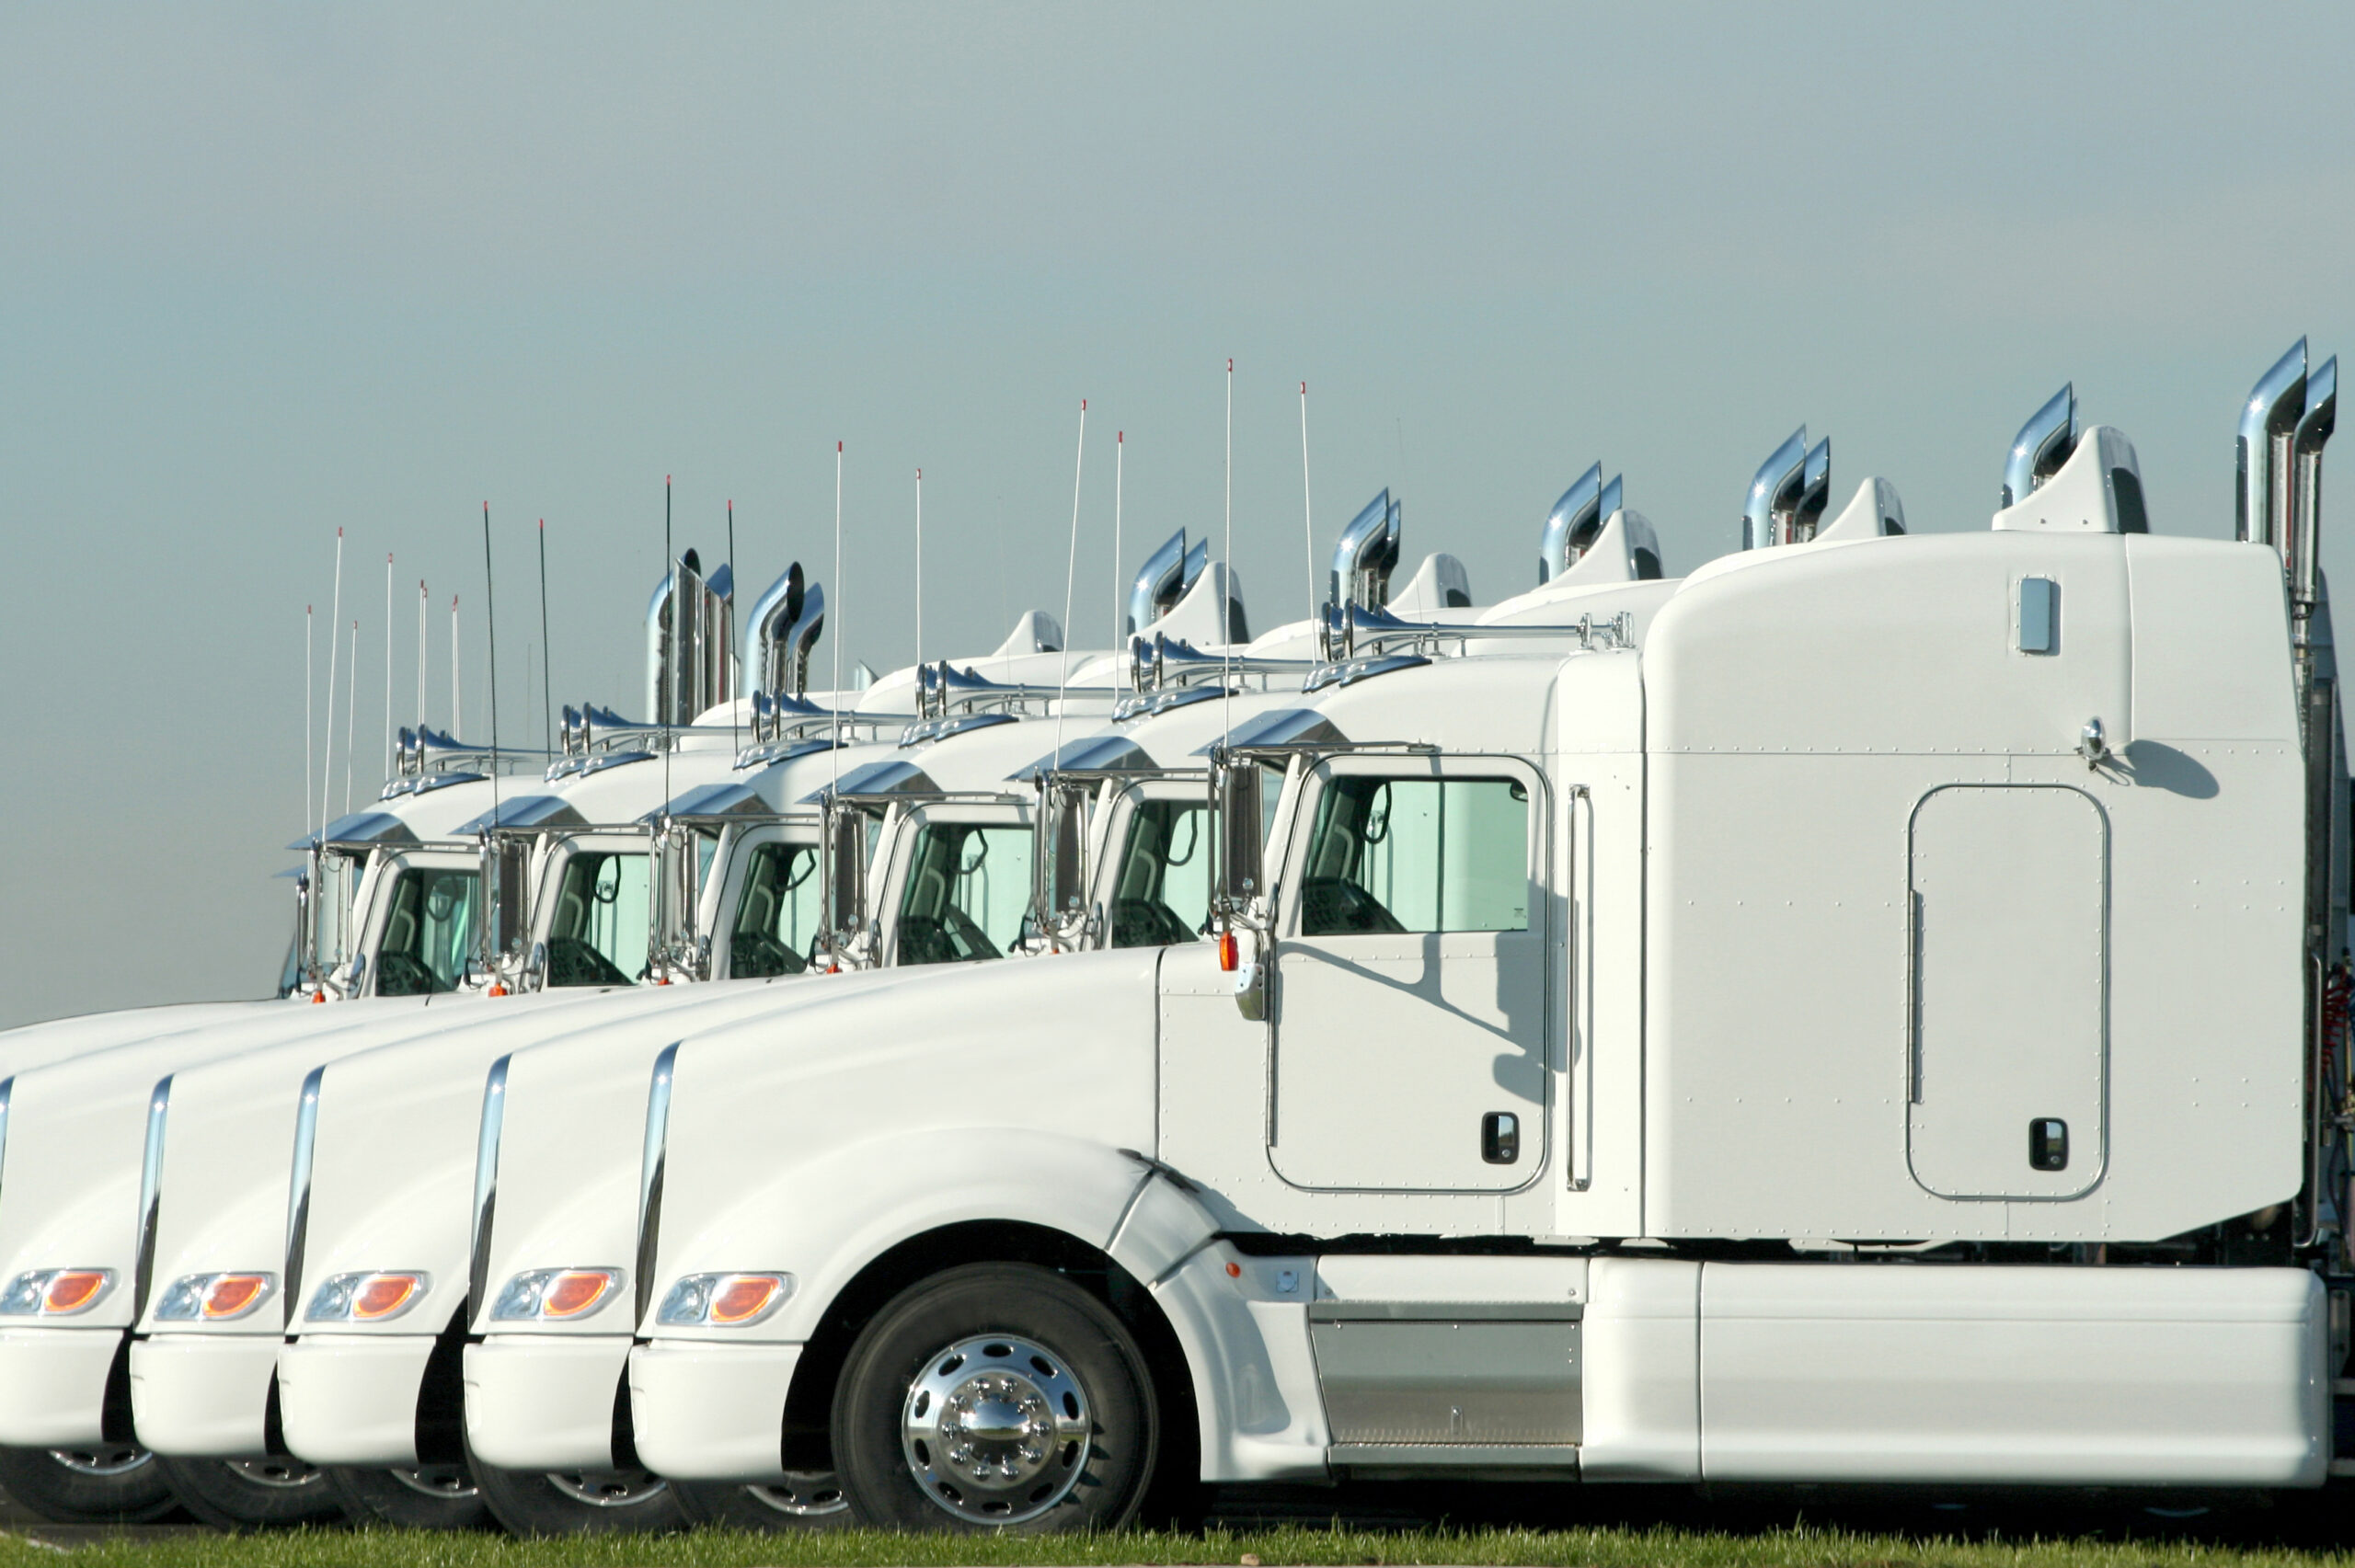 Six identical white semi trucks parked together